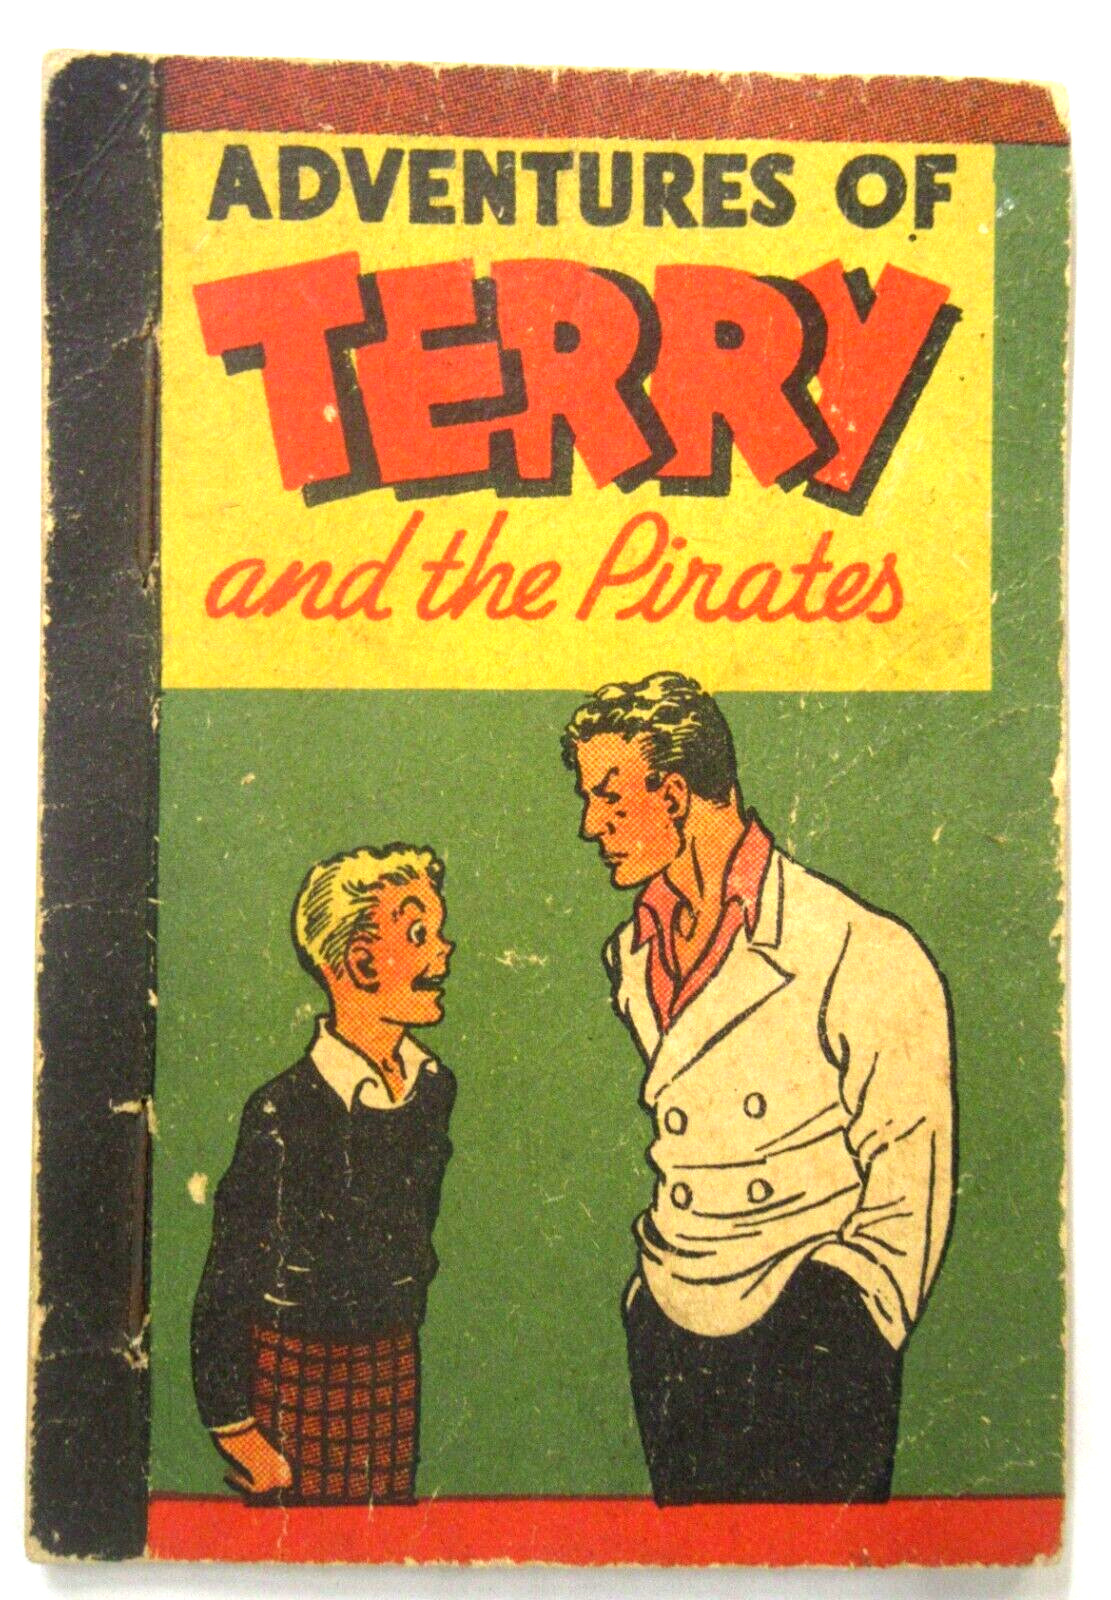 1938 TERRY & THE PIRATES Milton Caniff Whitman penny book PENNEY\'S premium yy